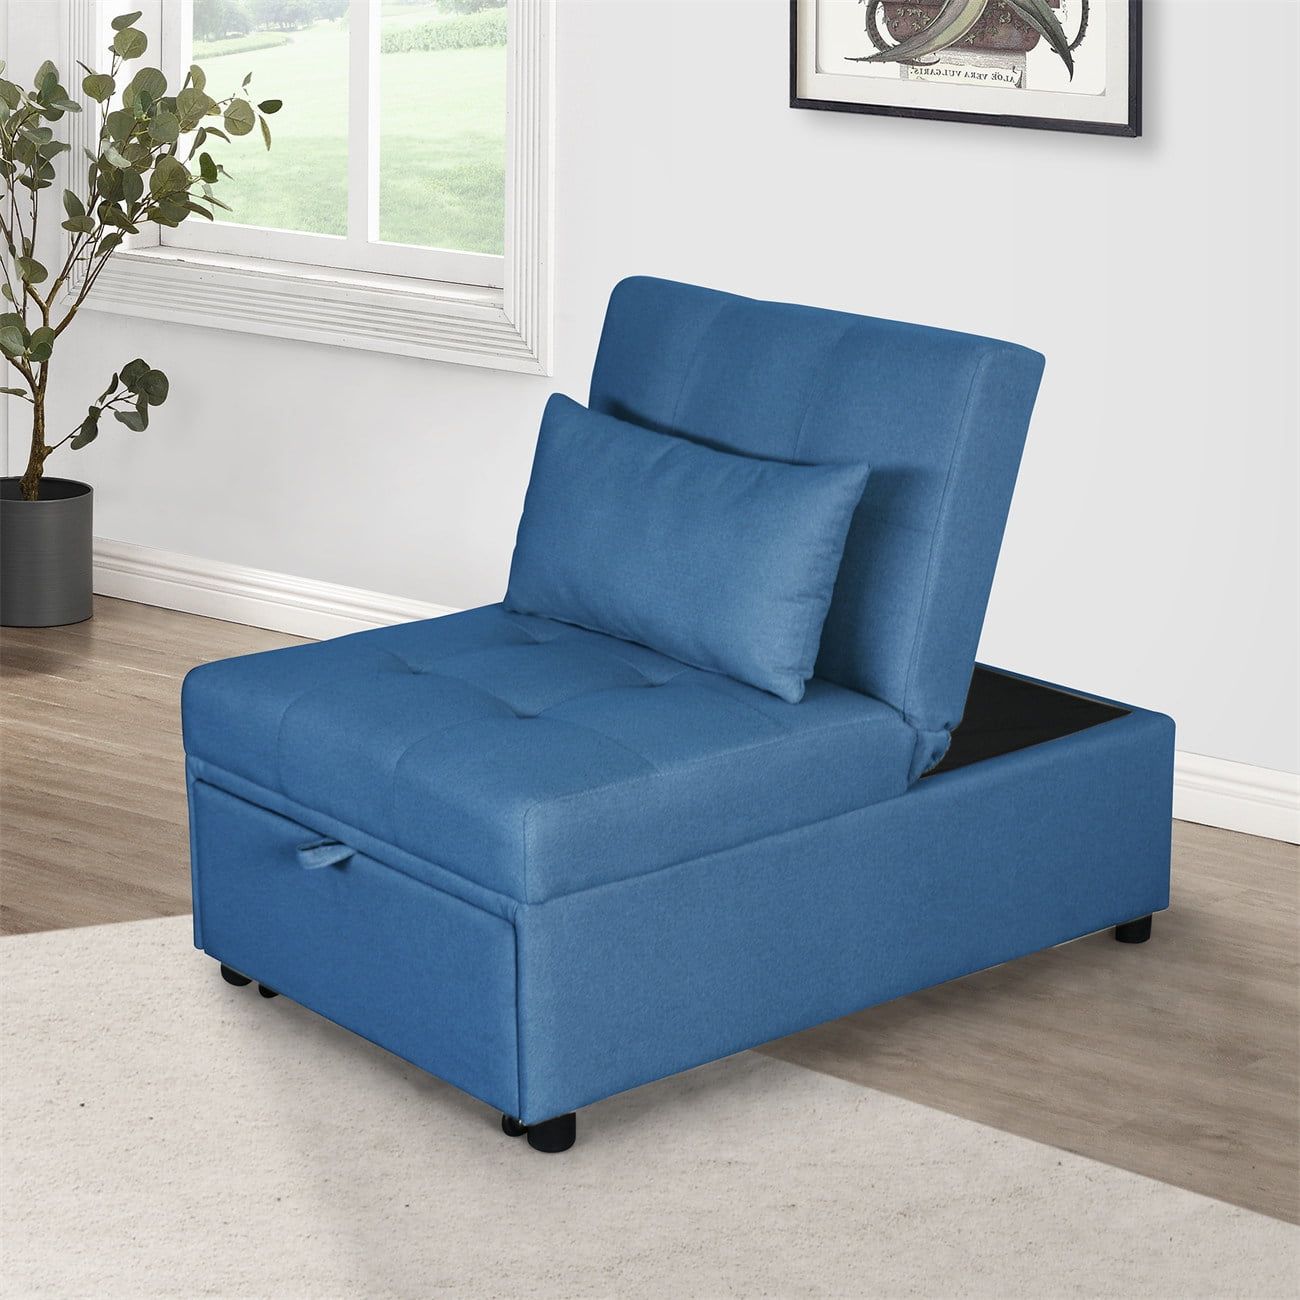 4in1 Multi Function Folding Sofa Bed Chair, Single Folding Ottoman Sleeper  Sofa Bed, Modern Sleeper Convertible Chair Adjustable Backrest, Small Couch Bed  For Living Room/small Apartment, Navy Blue – Walmart In 4 In 1 Convertible Sleeper Chair Beds (View 8 of 15)